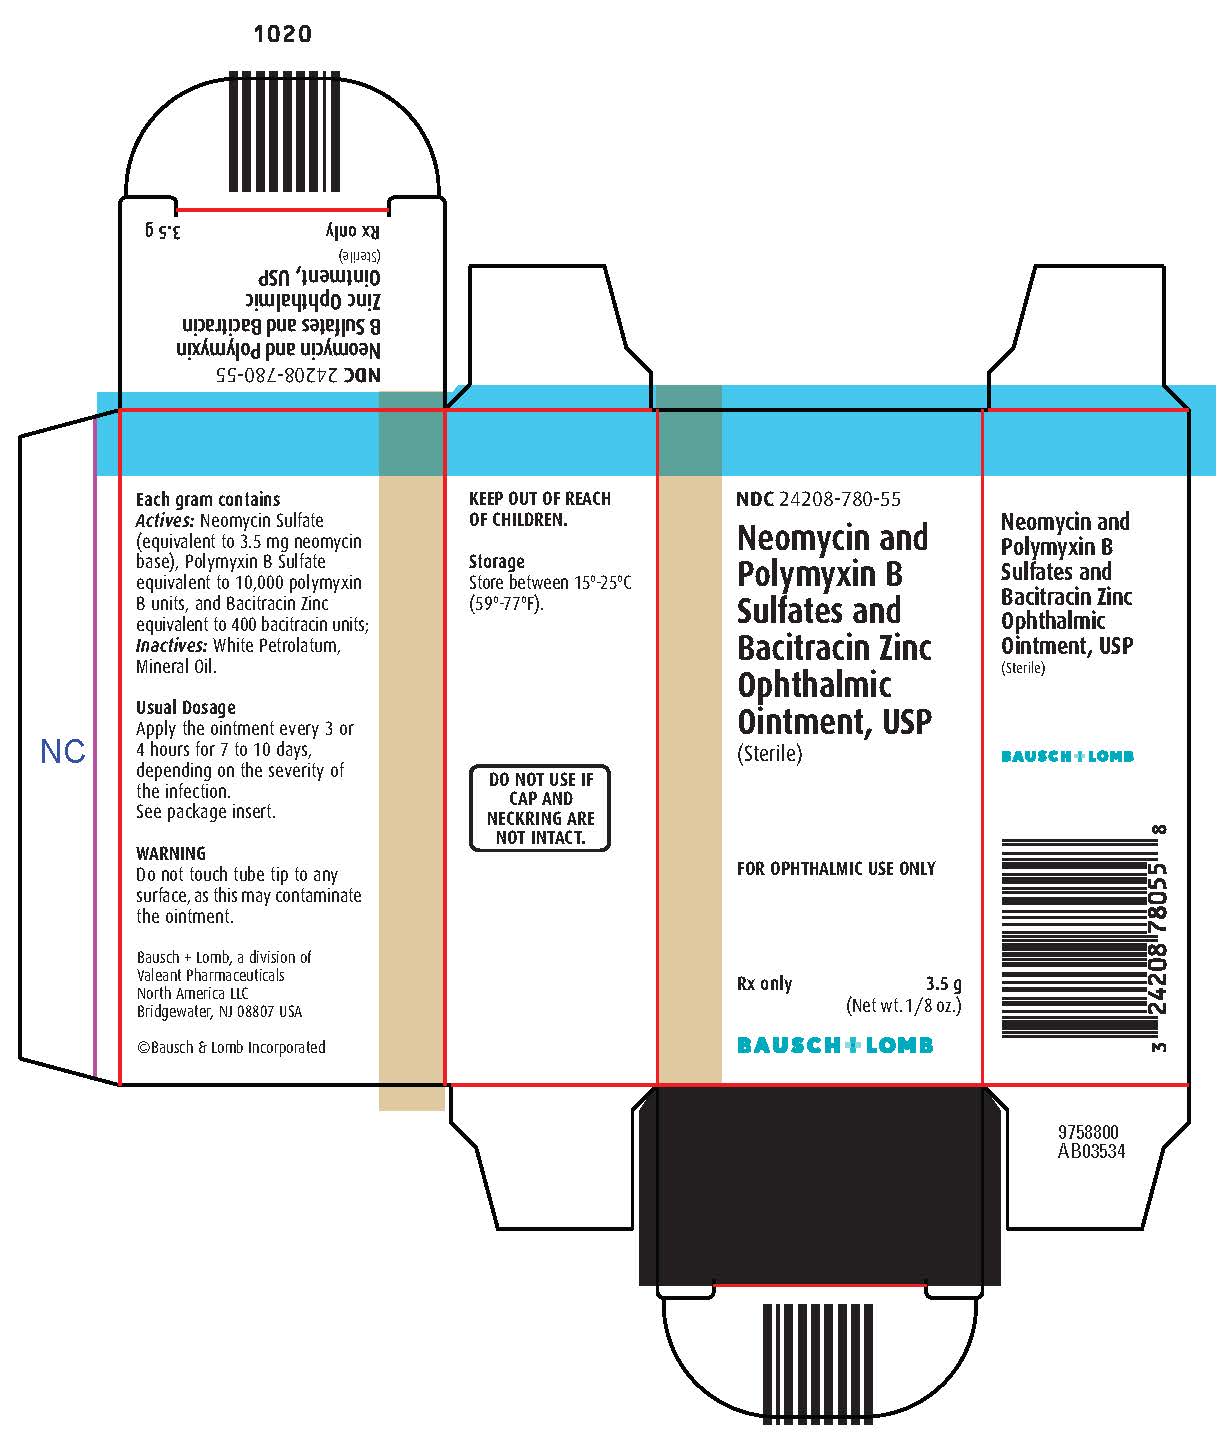 Neomycin and Polymyxin B Sulfates and Bacitracin Zinc Ophthalmic ointment, USP Carton Label